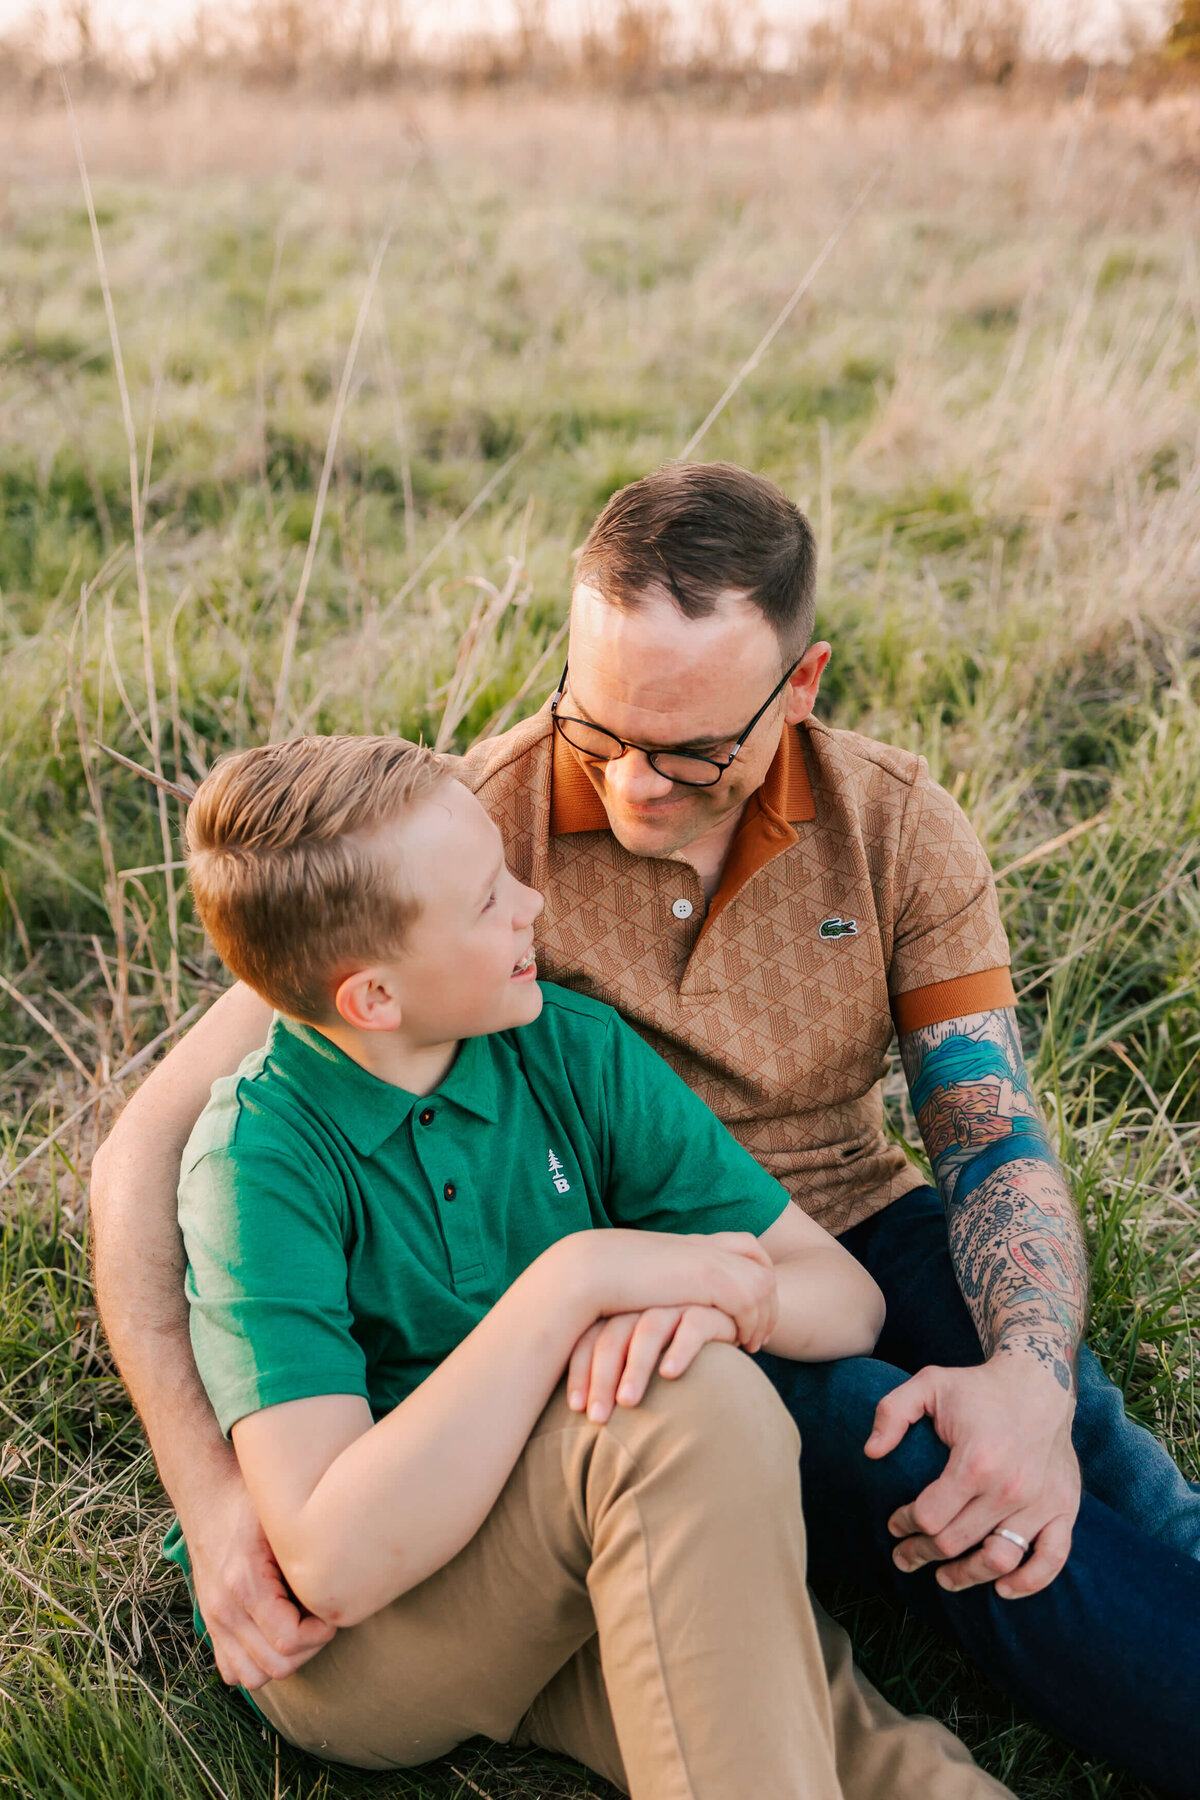 A father and son sitting together  in a field looking at each other and smiling